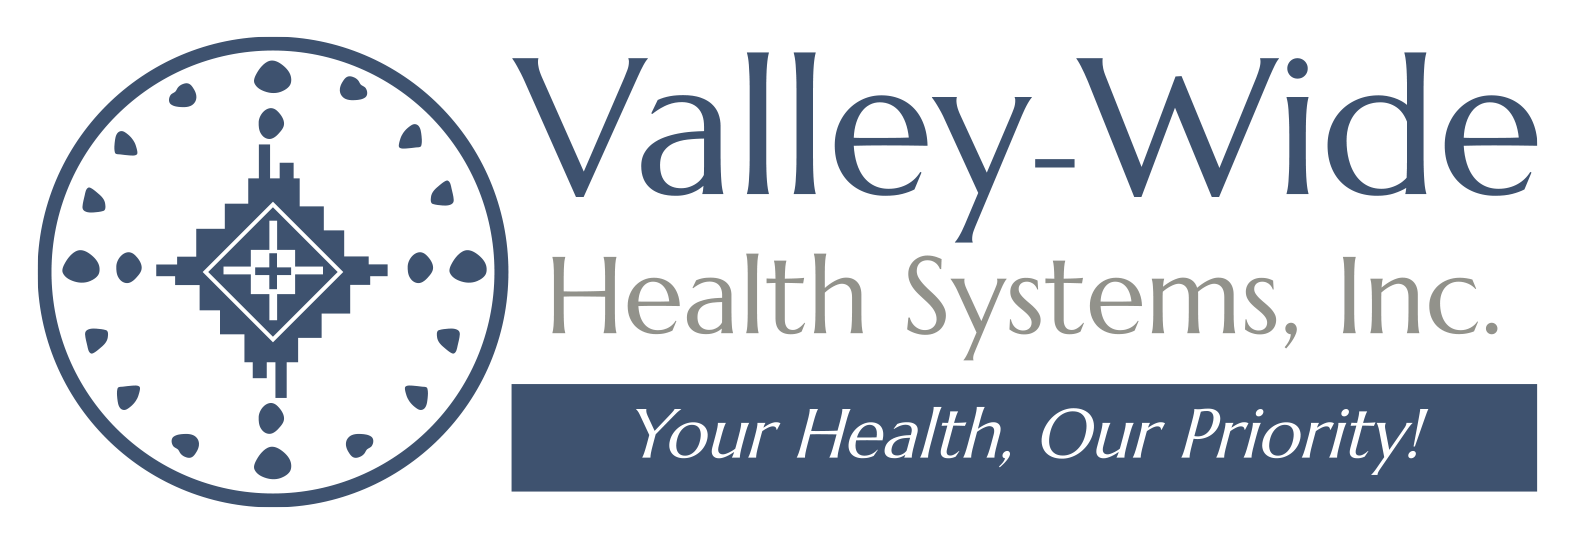 Valley wide health systems jobs